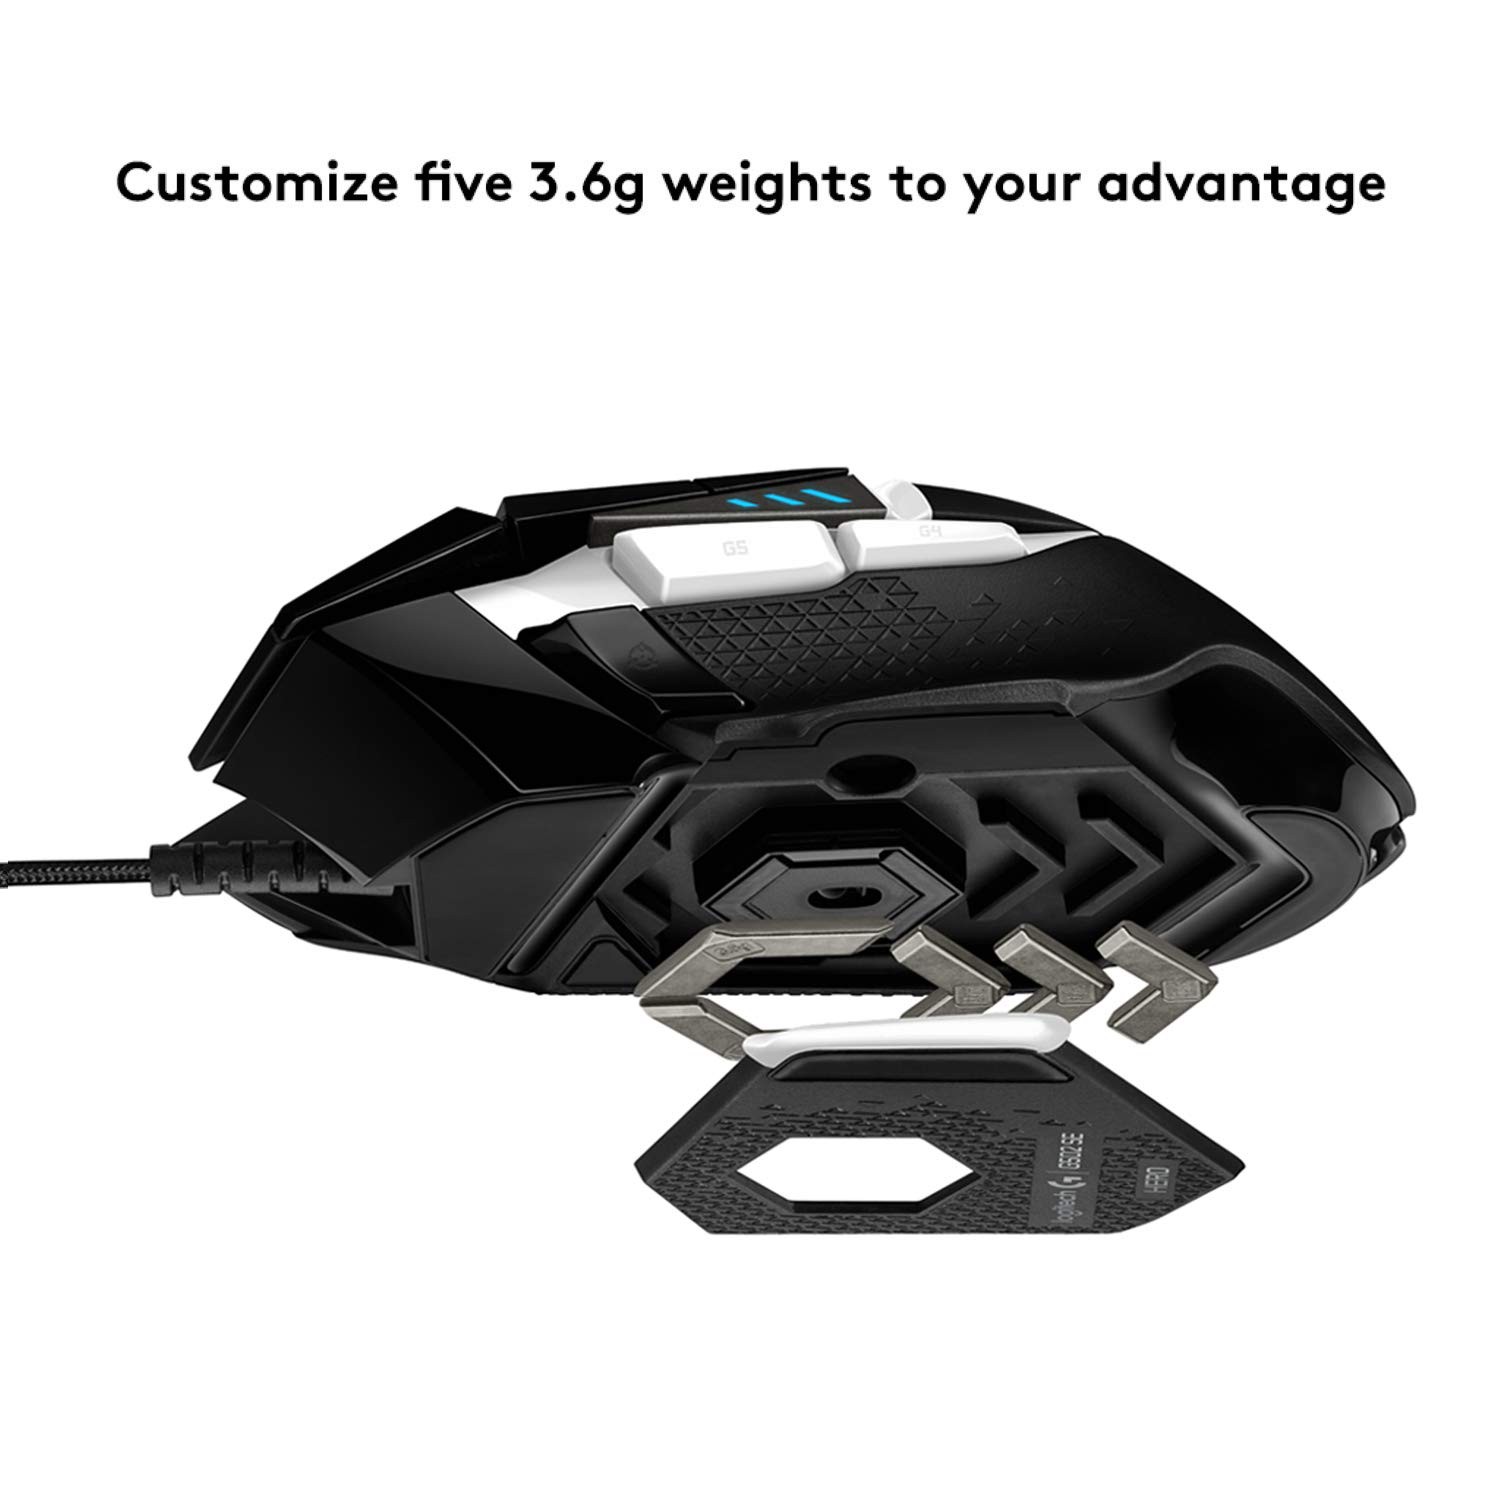 LOGITECH G502 SE HERO Wired Gaming Mouse | 16 000 DPI